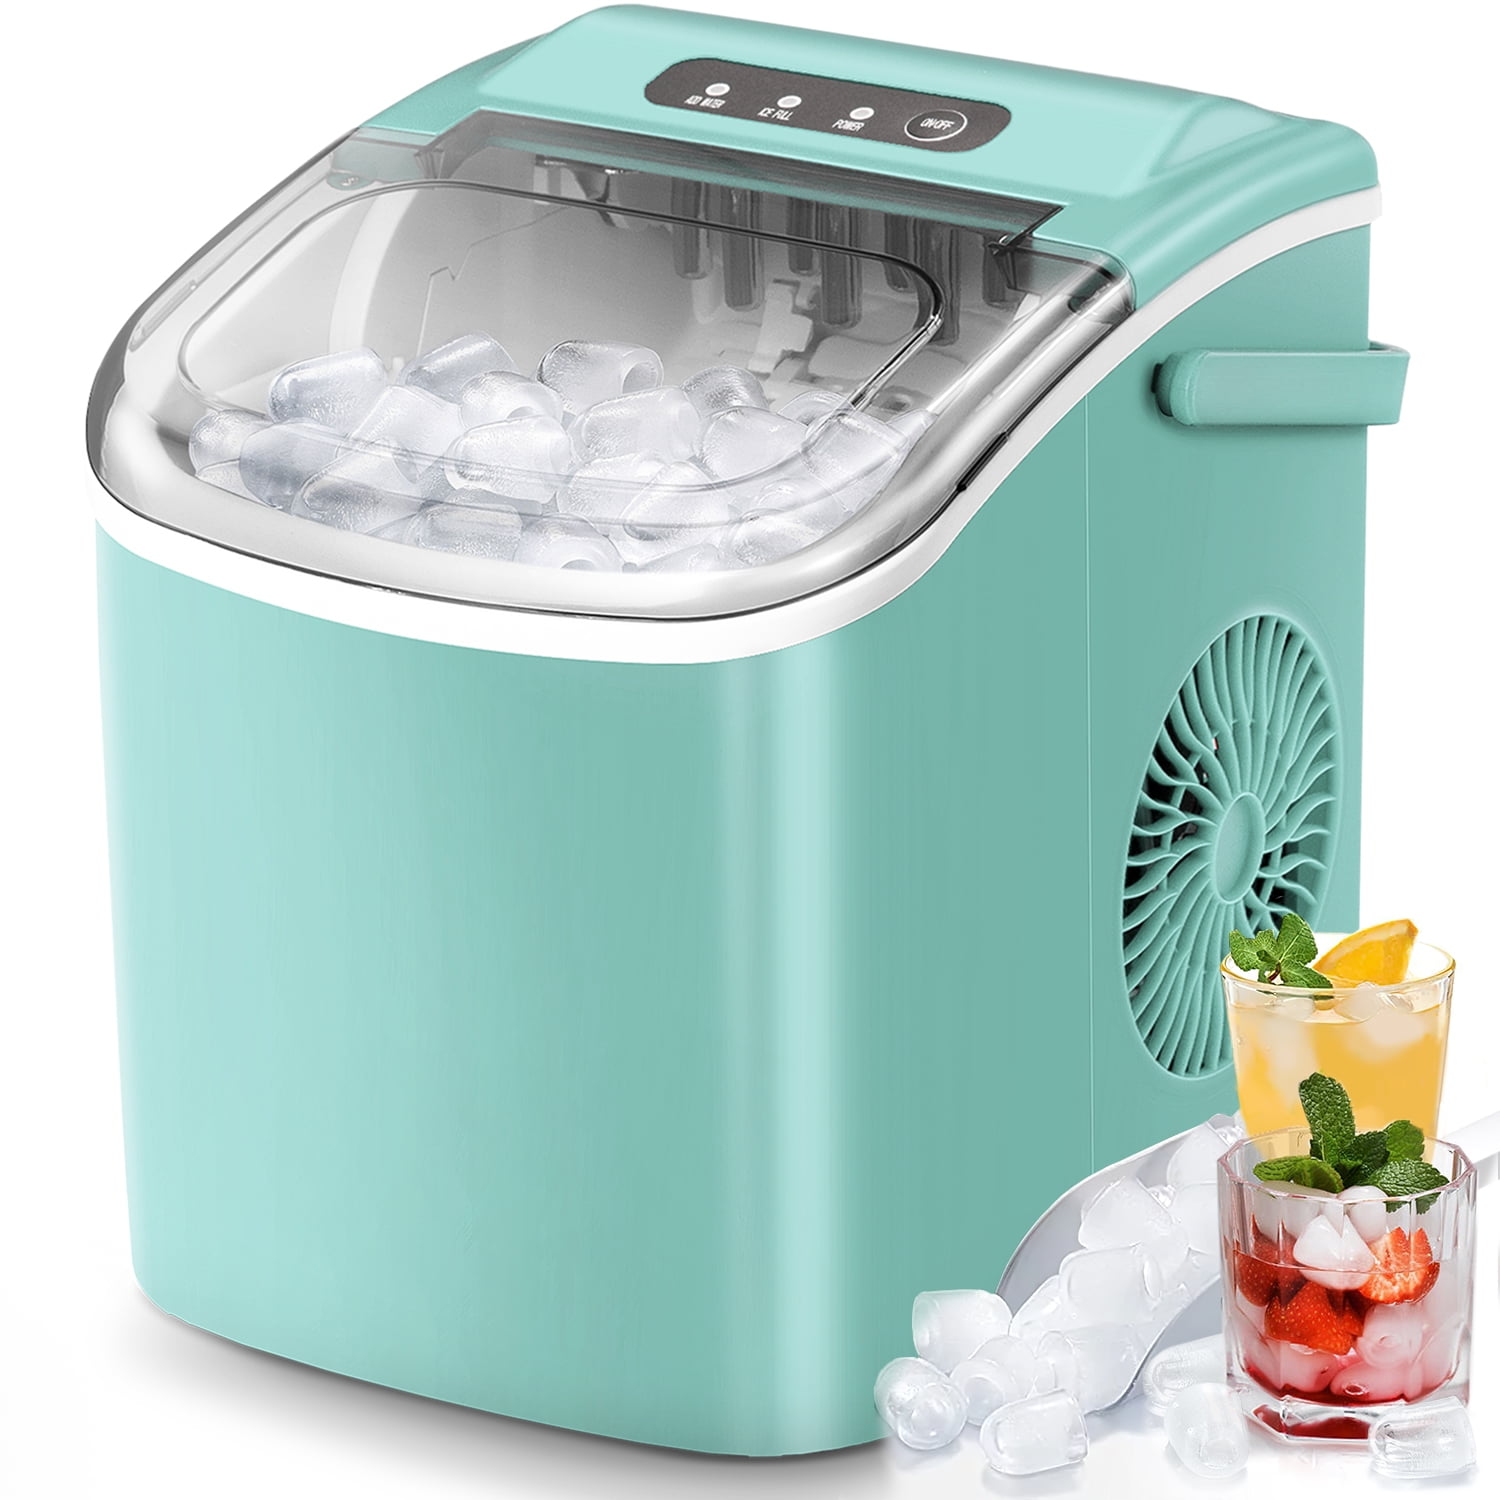 The Best Countertop Ice Makers To Give You Ice Cubes At The Push Of A Button